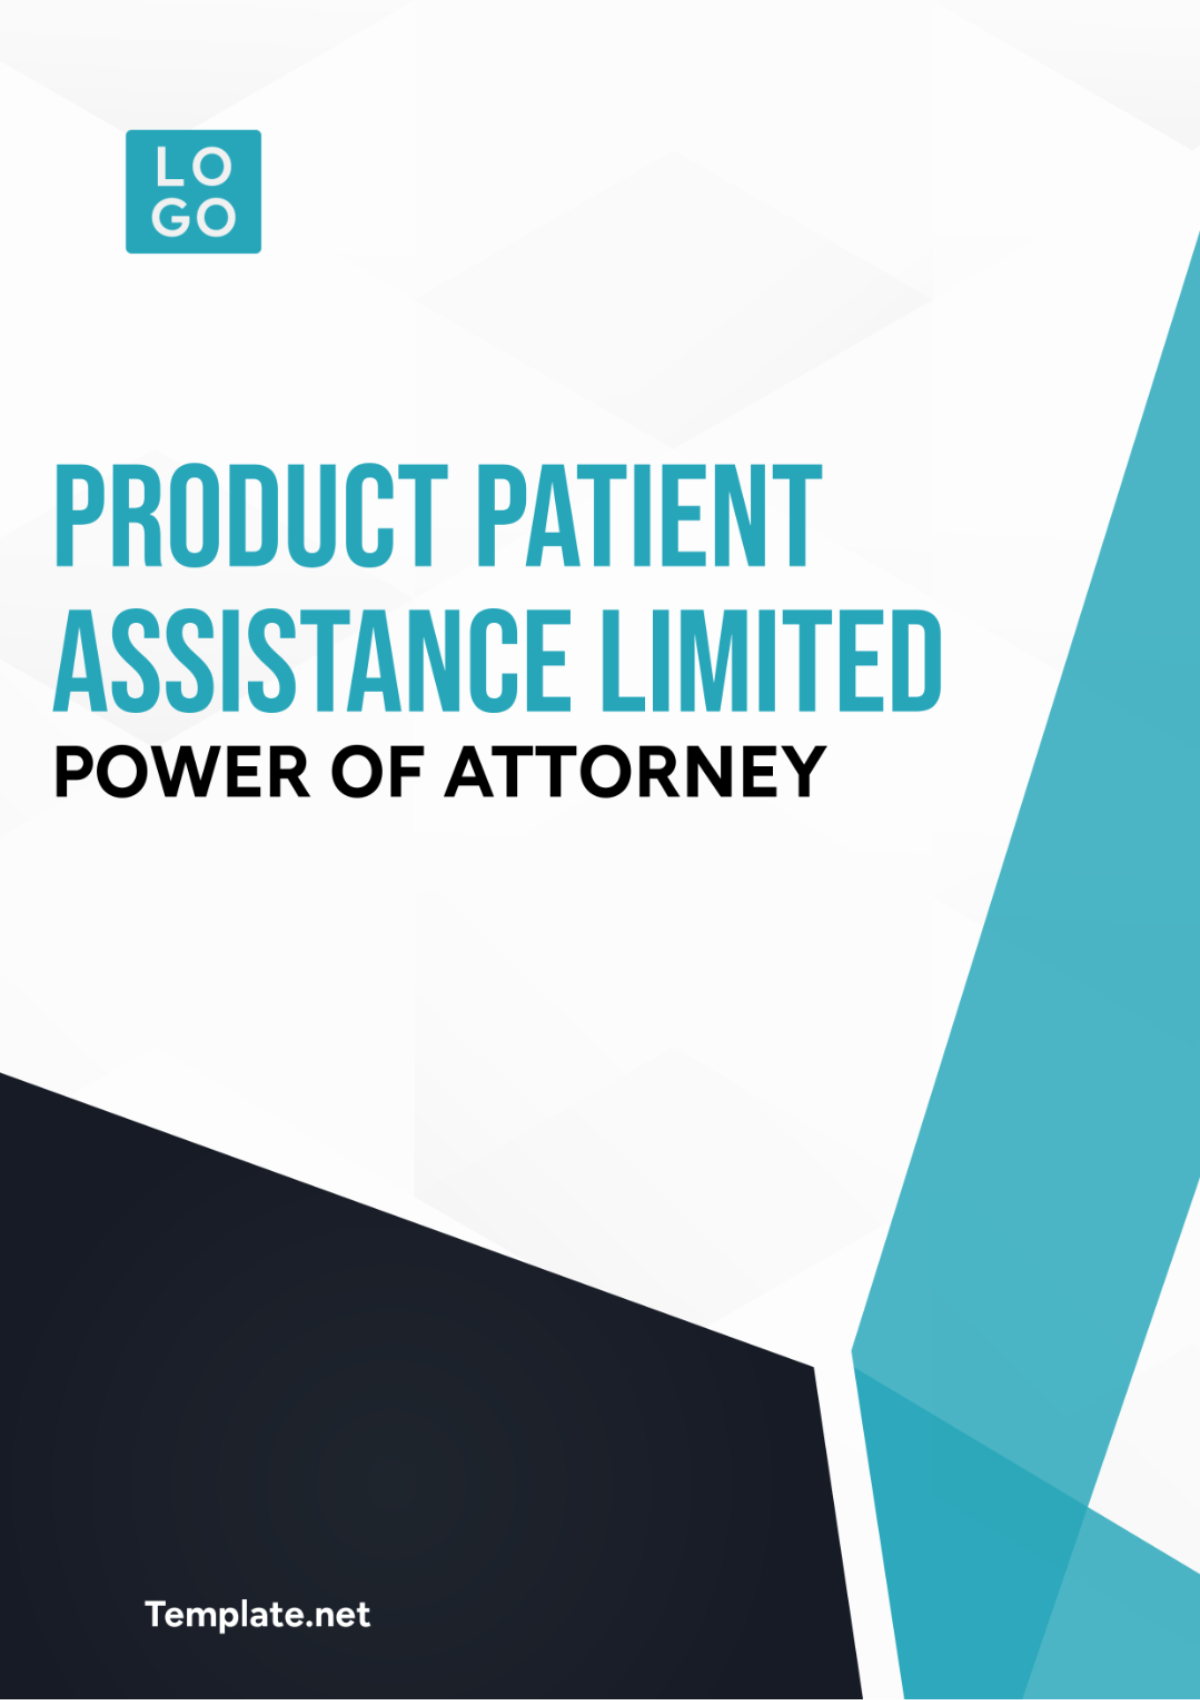 Product Patient Assistance Limited Power of Attorney Template